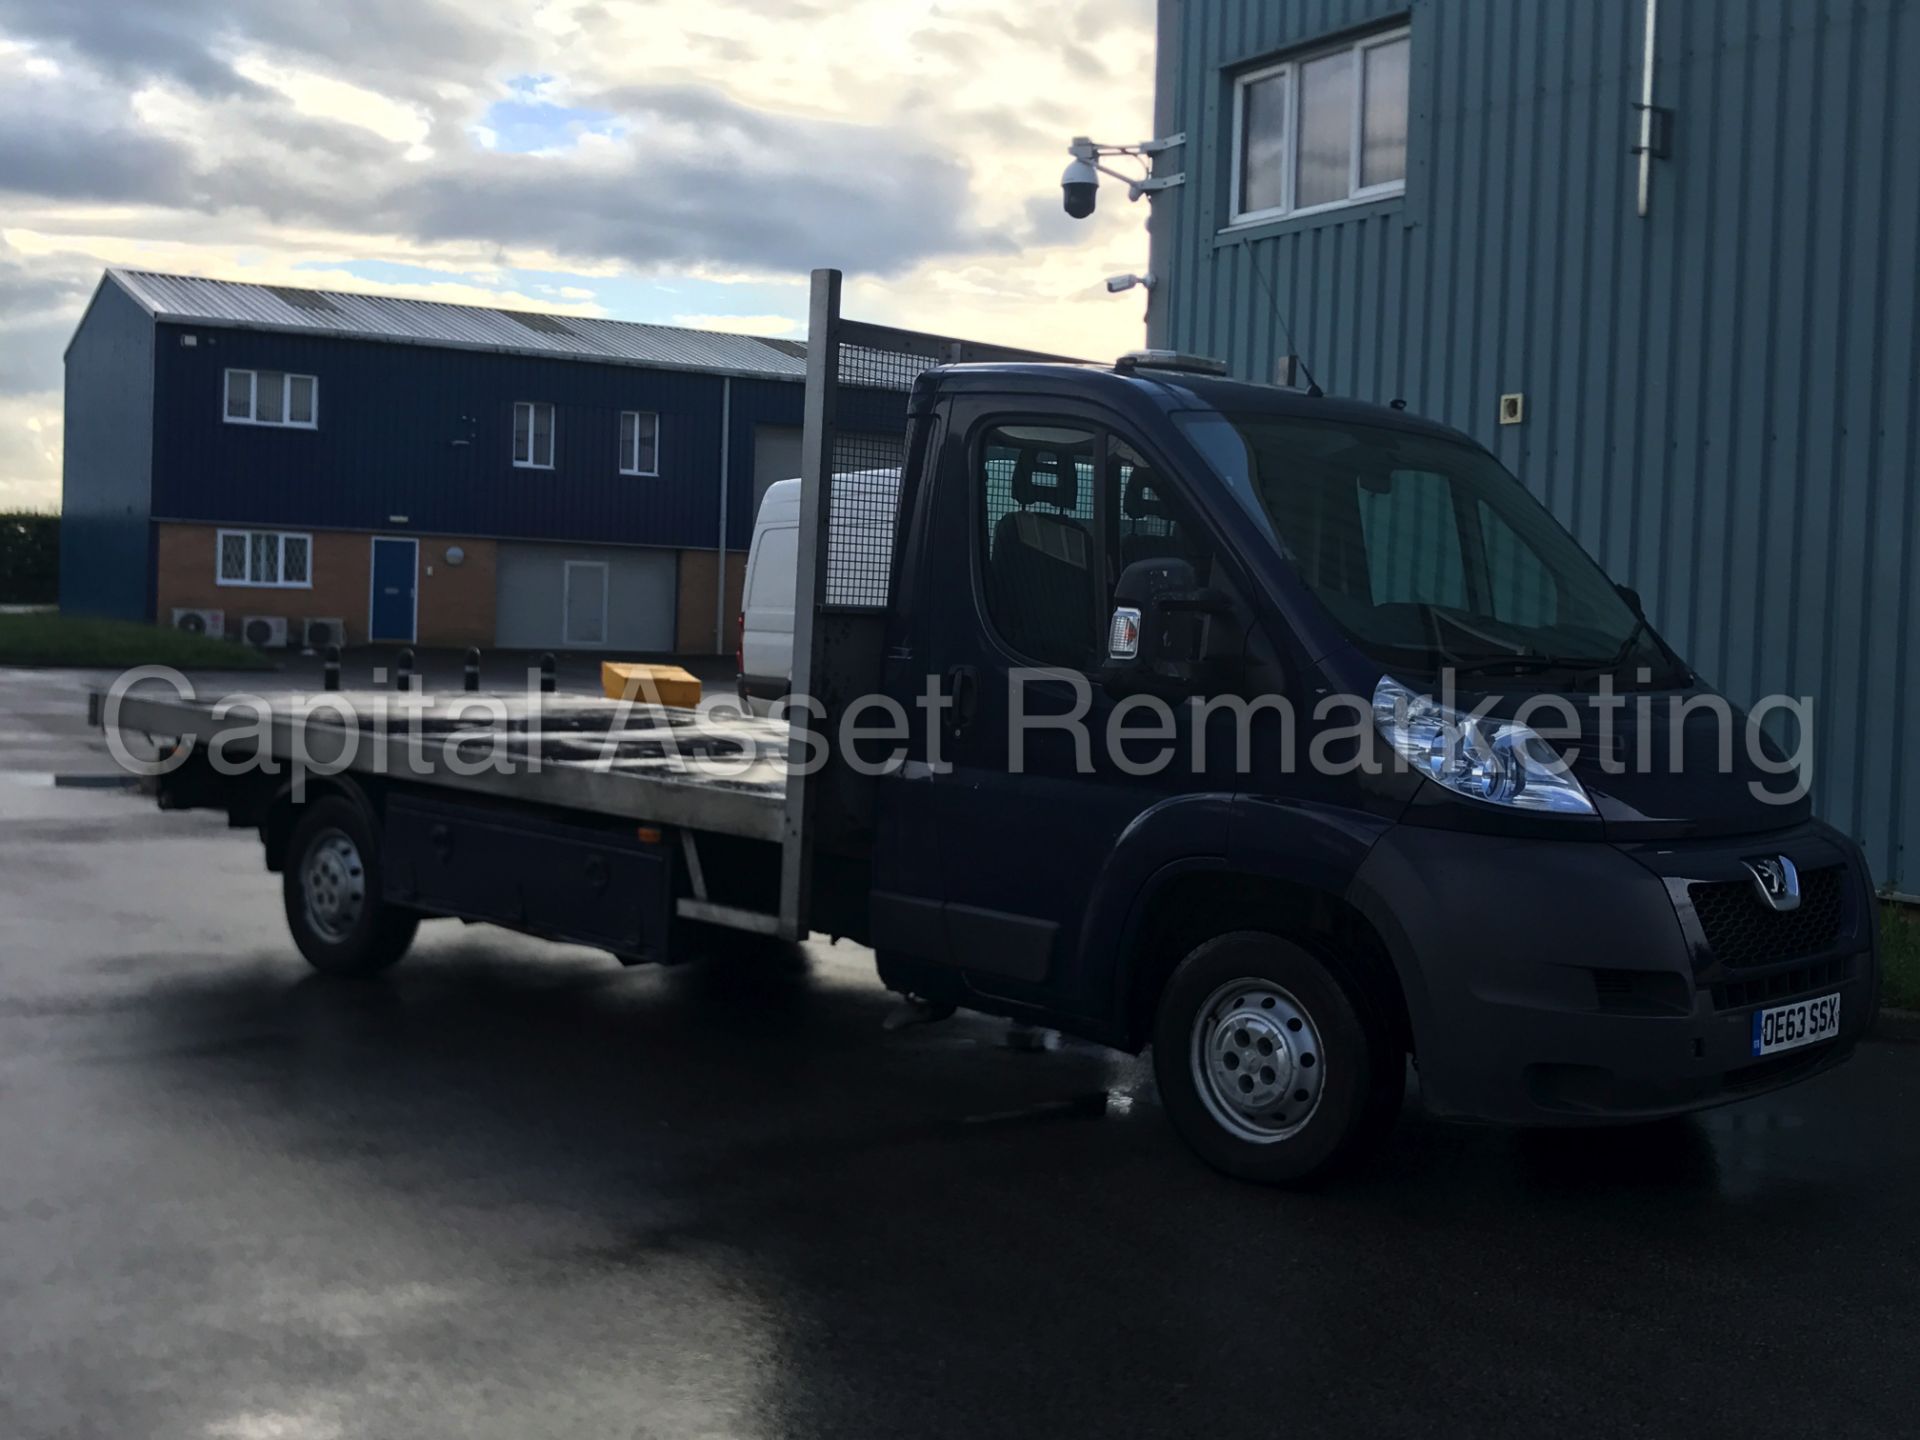 PEUGEOT BOXER 'L3 LWB - 13 FT FLATBED' (2014 MODEL) 2.2 HDI - 130 BHP - 6 SPEED' (1 COMPANY OWNER) - Image 8 of 21